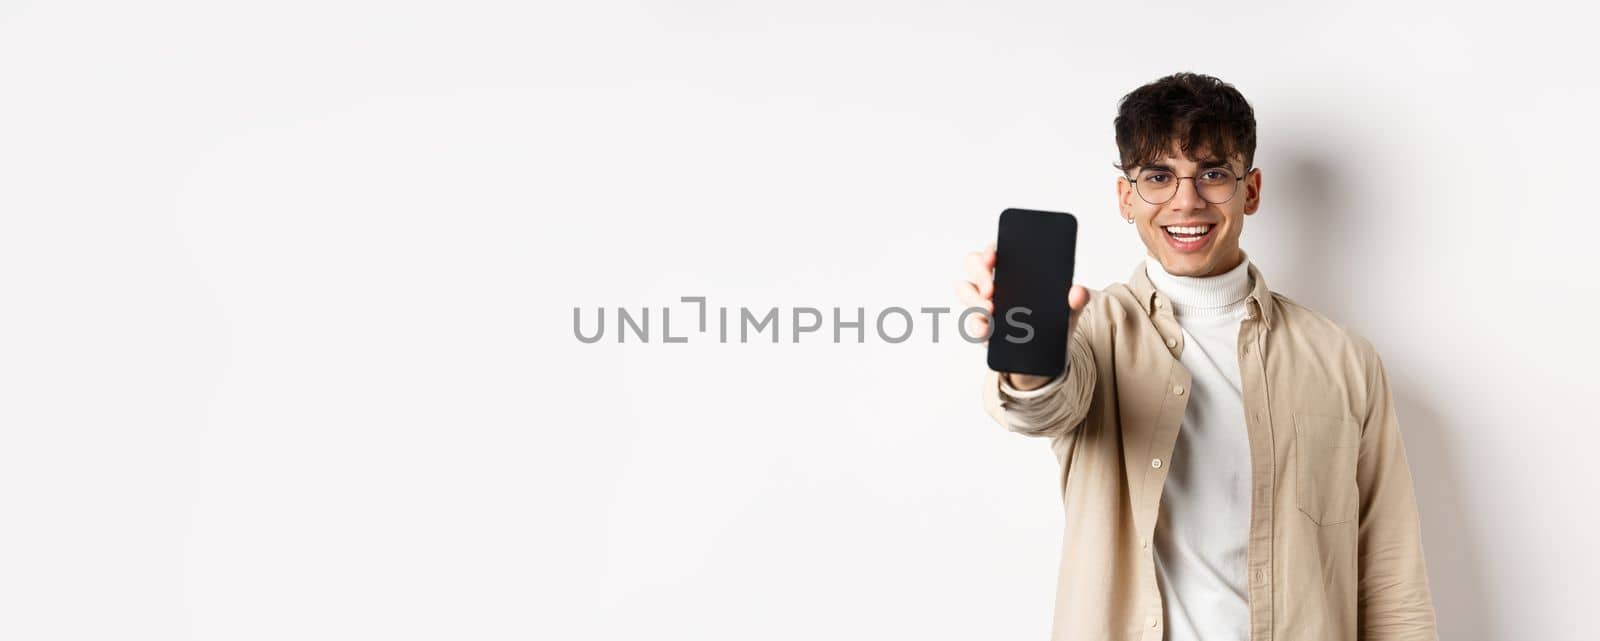 Handsome young man showing empty smartphone screen, standing on white background. Copy space